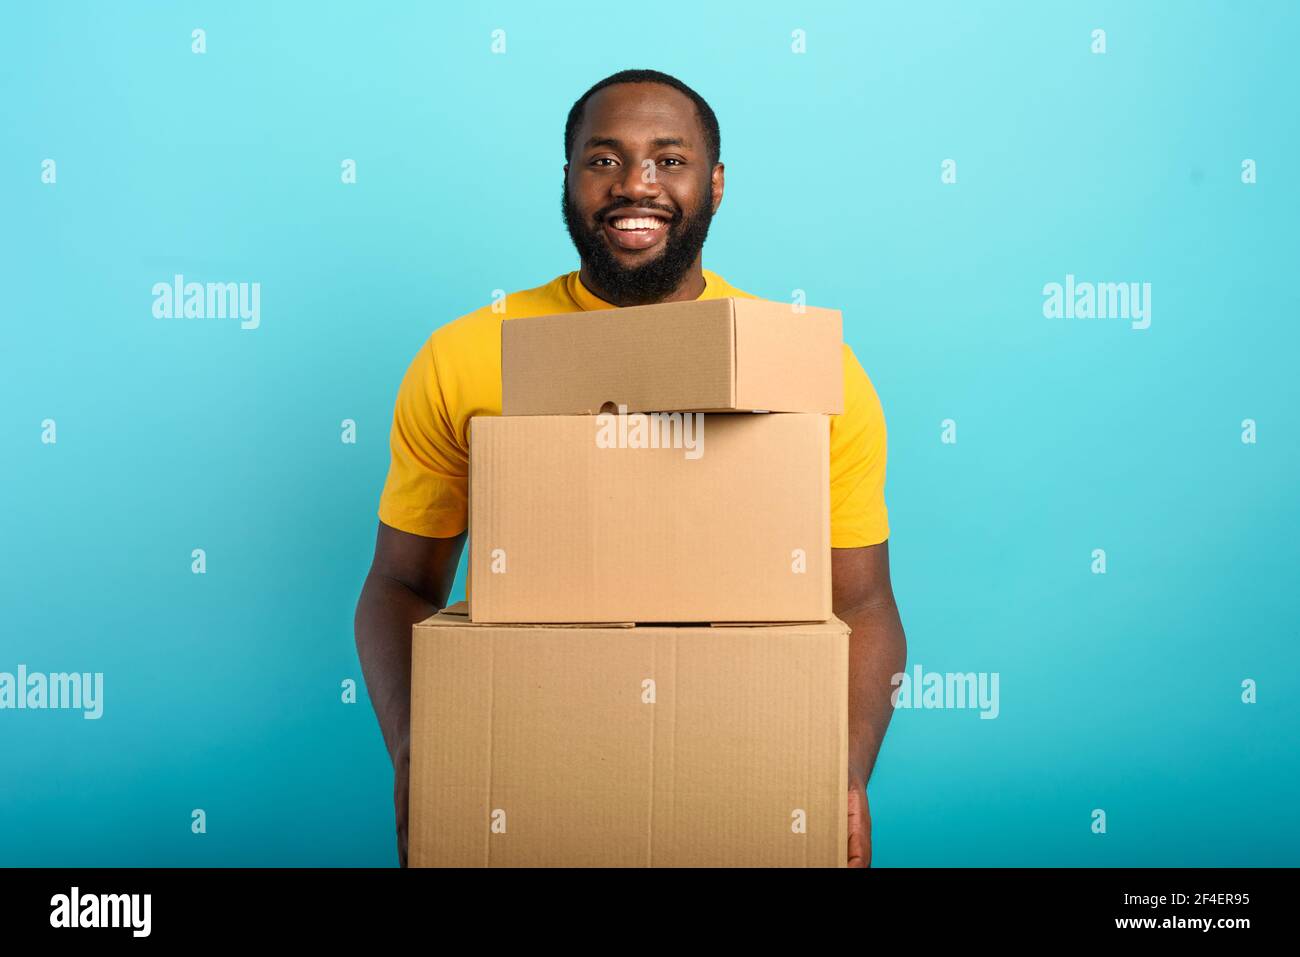 Happy boy receives a package from online shop order. Blue background. Stock Photo